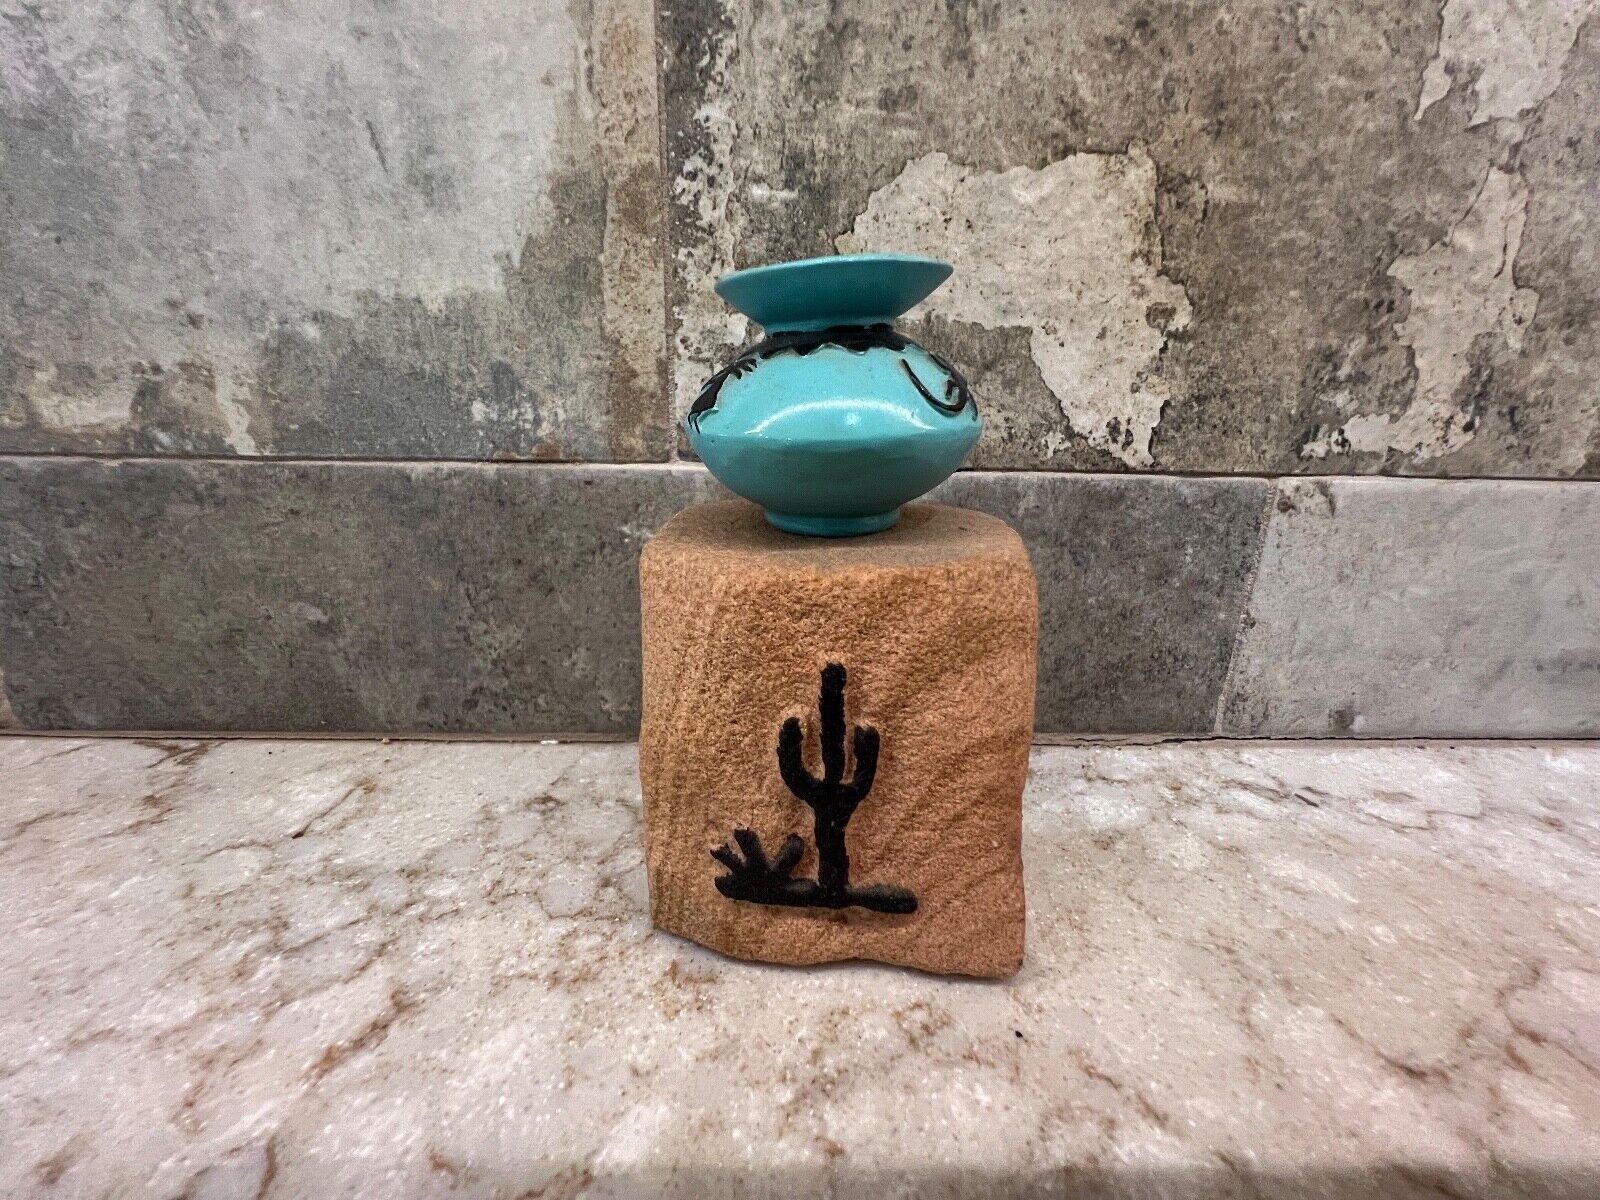 Southwestern Native American Stone With Turquoise Pot